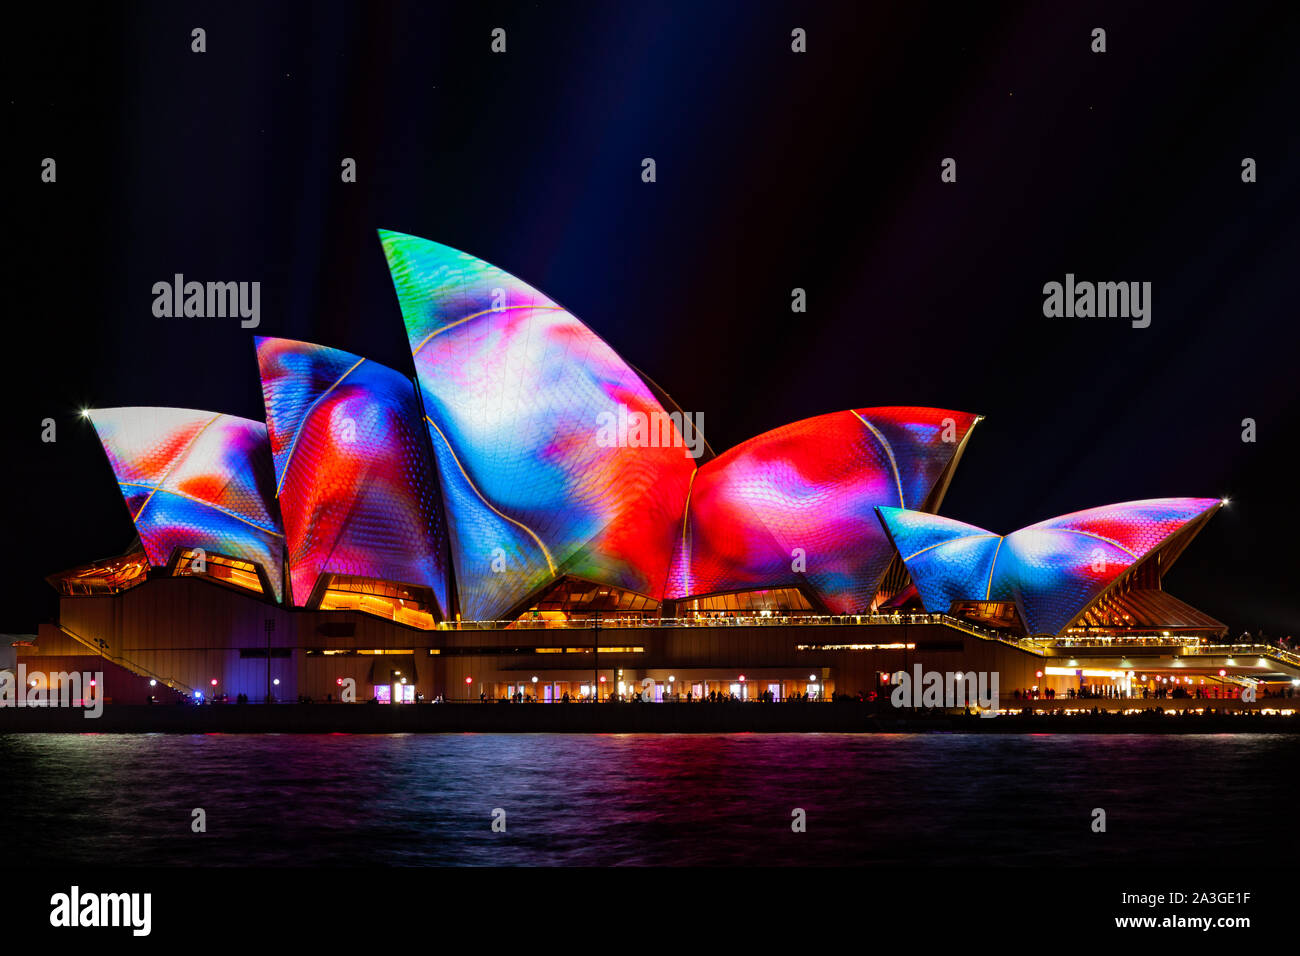 Sydney, Australia - 27. May 2017: The famous Sydney Opera House is illuminated with different designs in vibrant colors during the annual Vivid Sydney Stock Photo